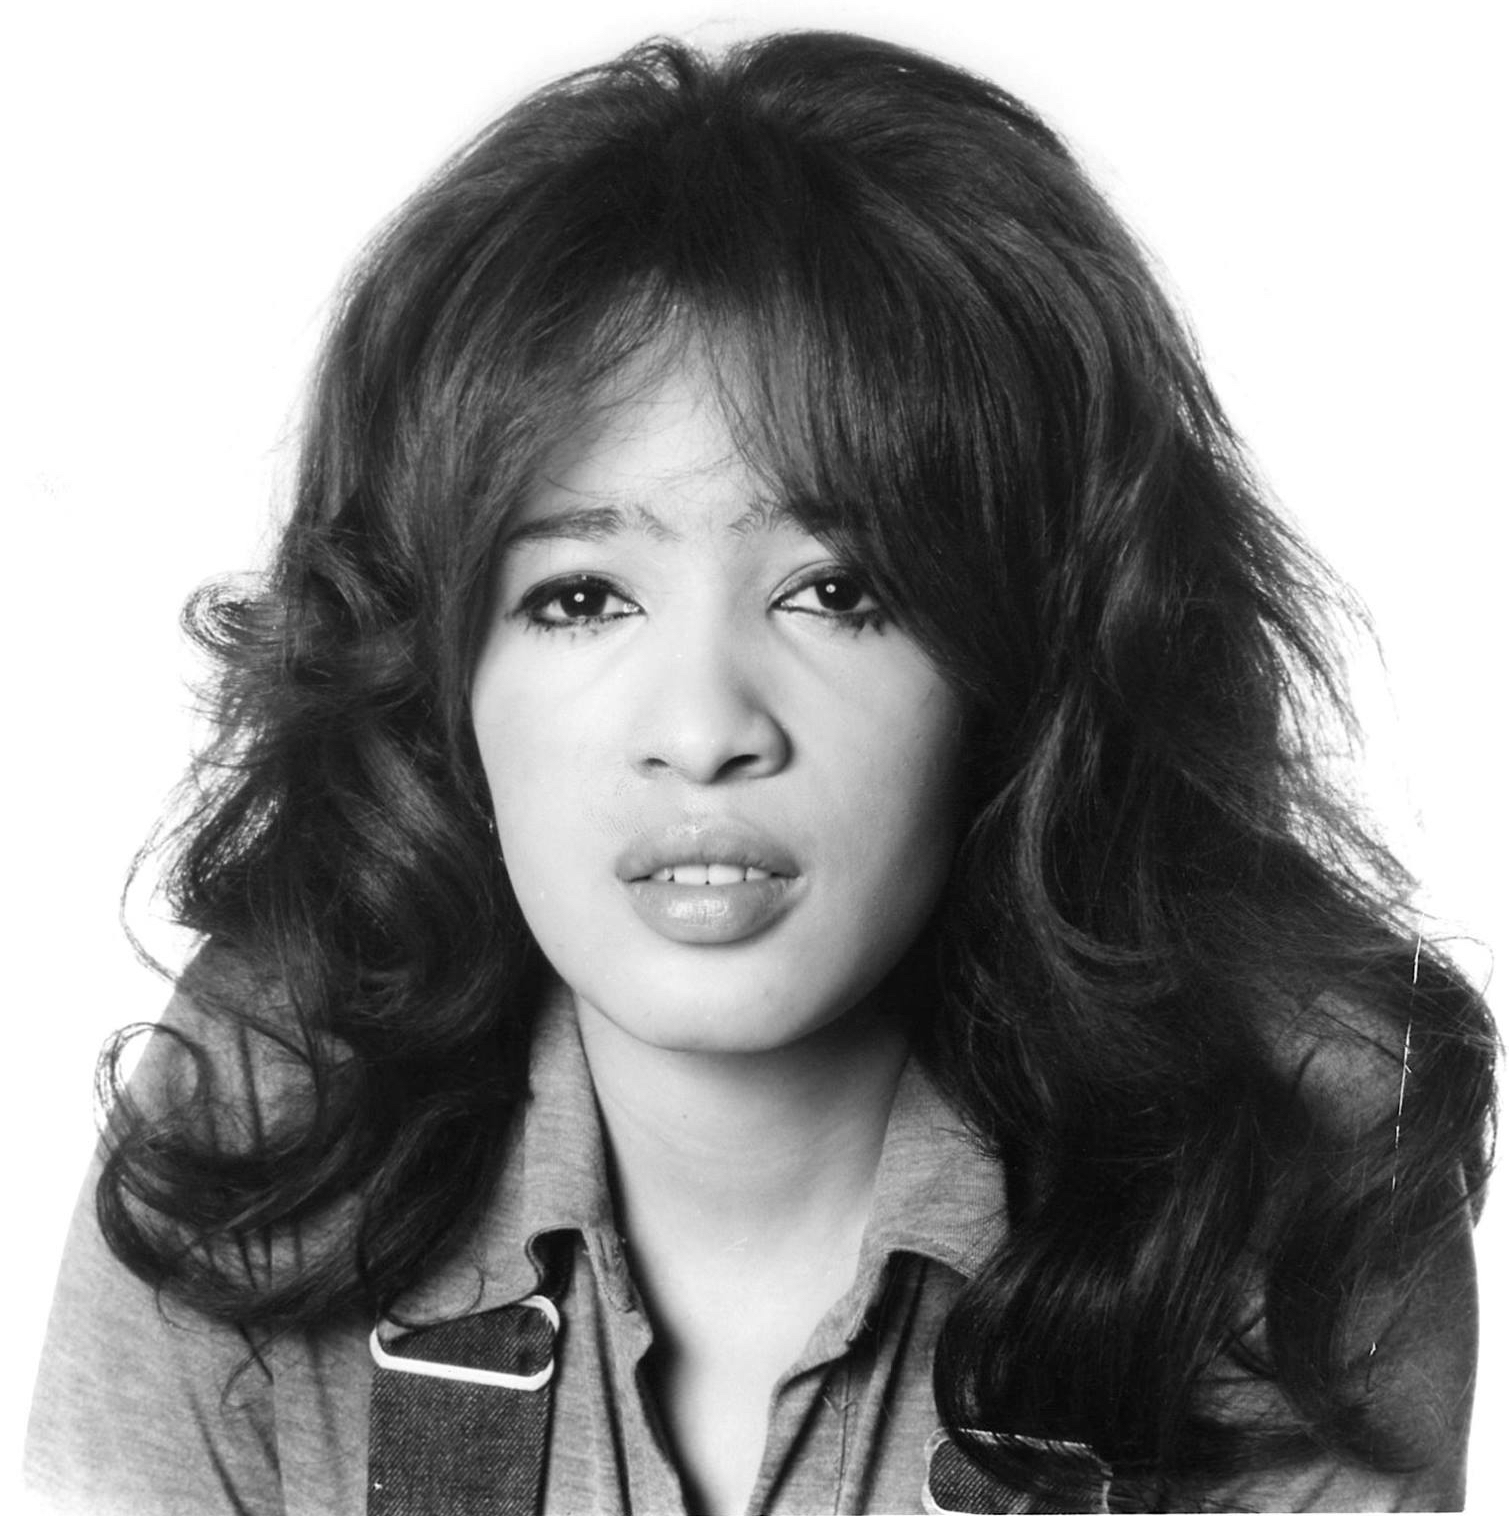 Ronnie Spector, lead singer of the Ronettes